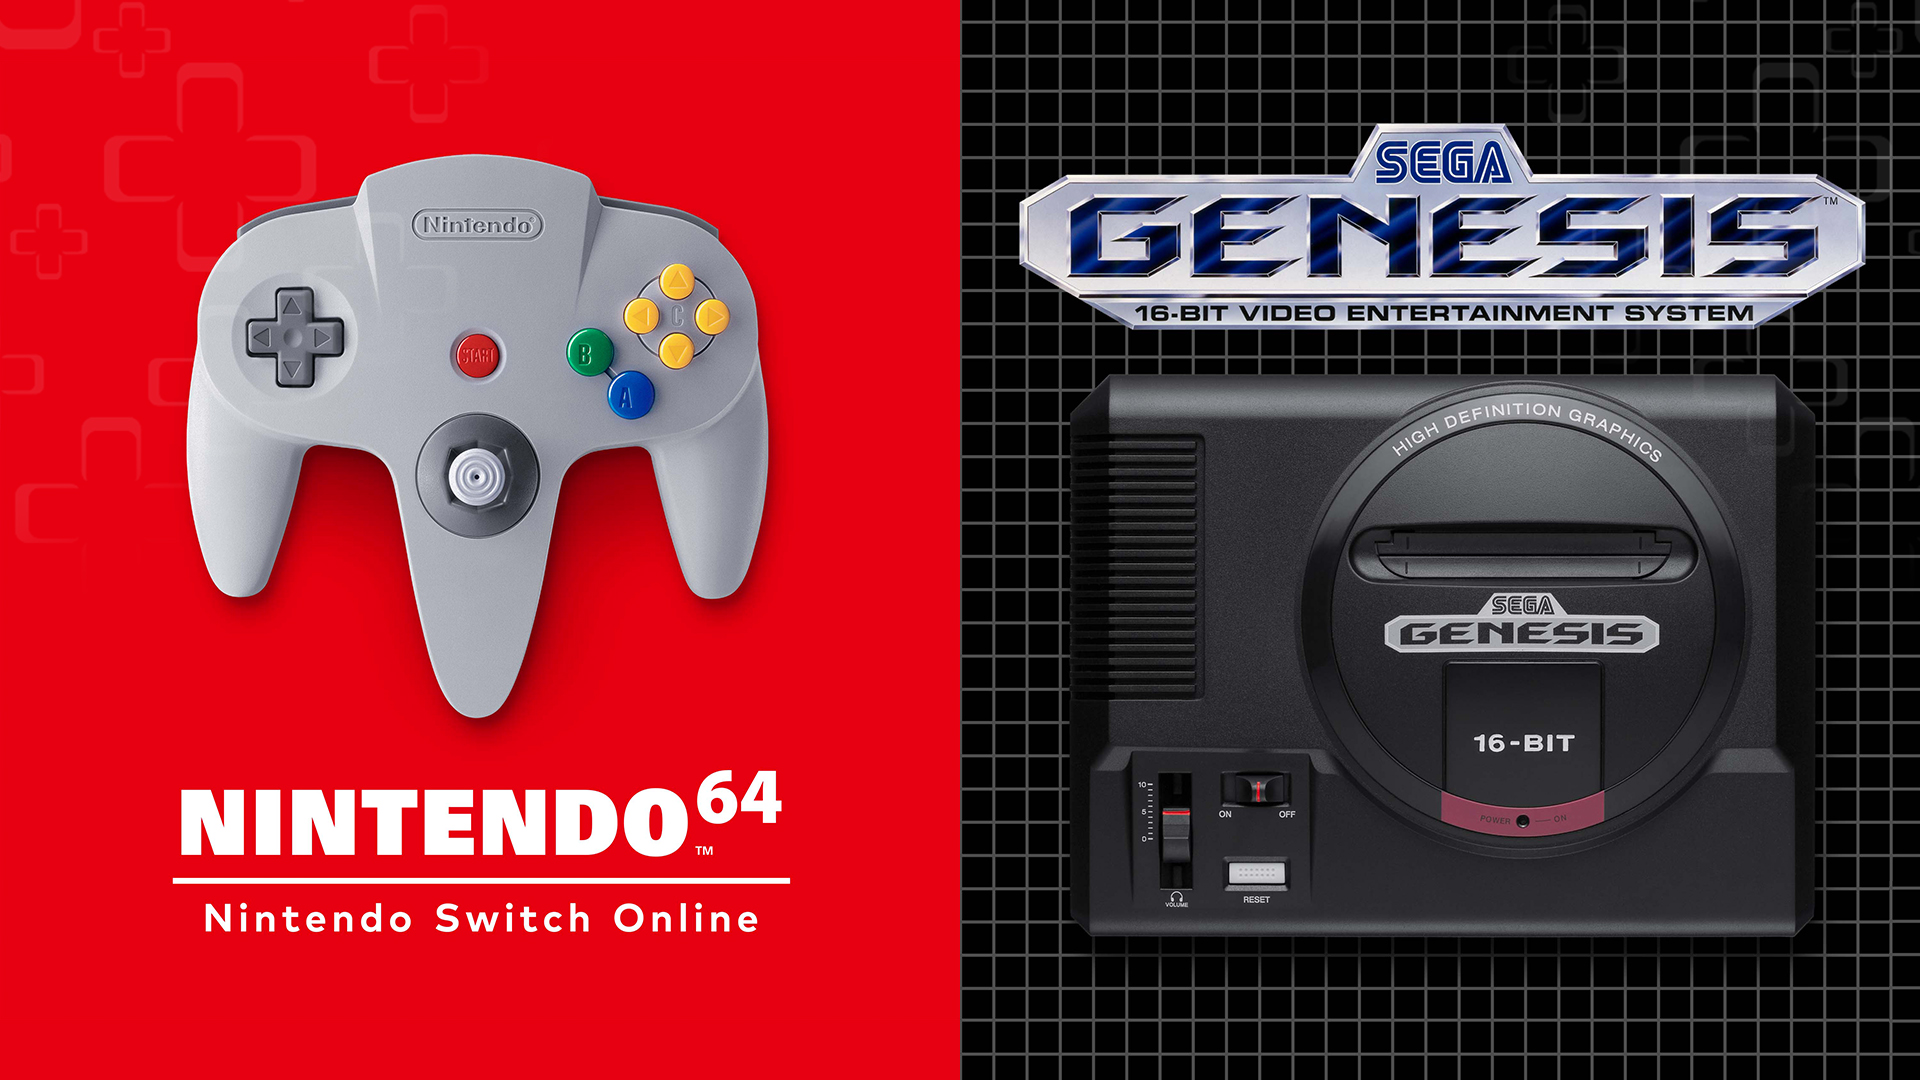 træthed forbruger majs Nintendo 64 and Sega Genesis games coming to Nintendo Switch Online in late  October, new retro controllers and membership plan announced - Nintendo Wire